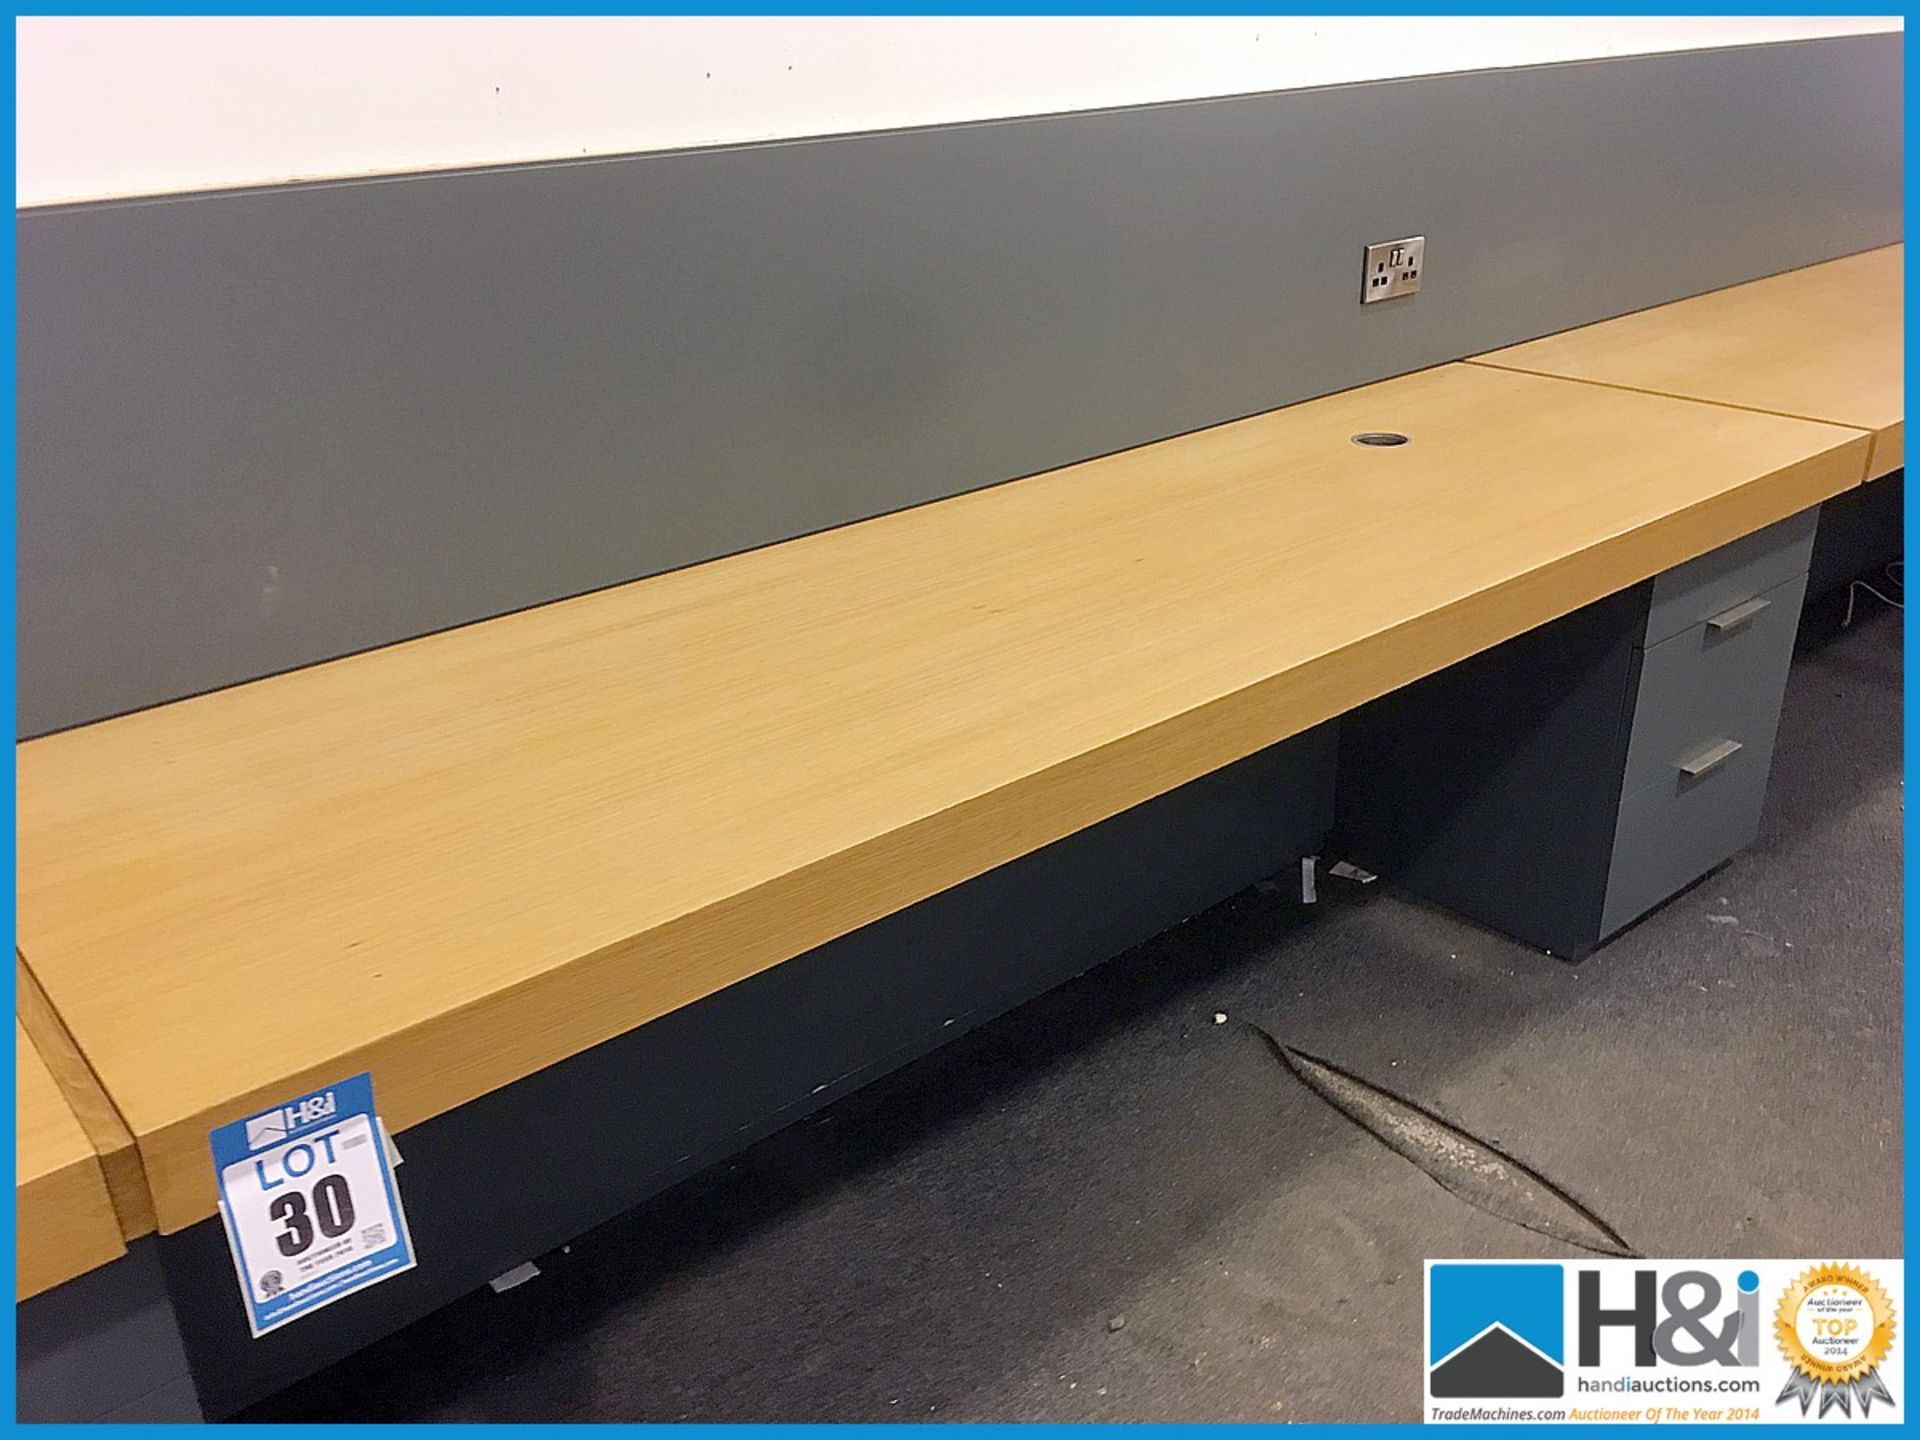 Long 3 desk assembly with drawers. Can be disassembled. Overall length 7.4m Appraisal: Used, good. - Image 3 of 4